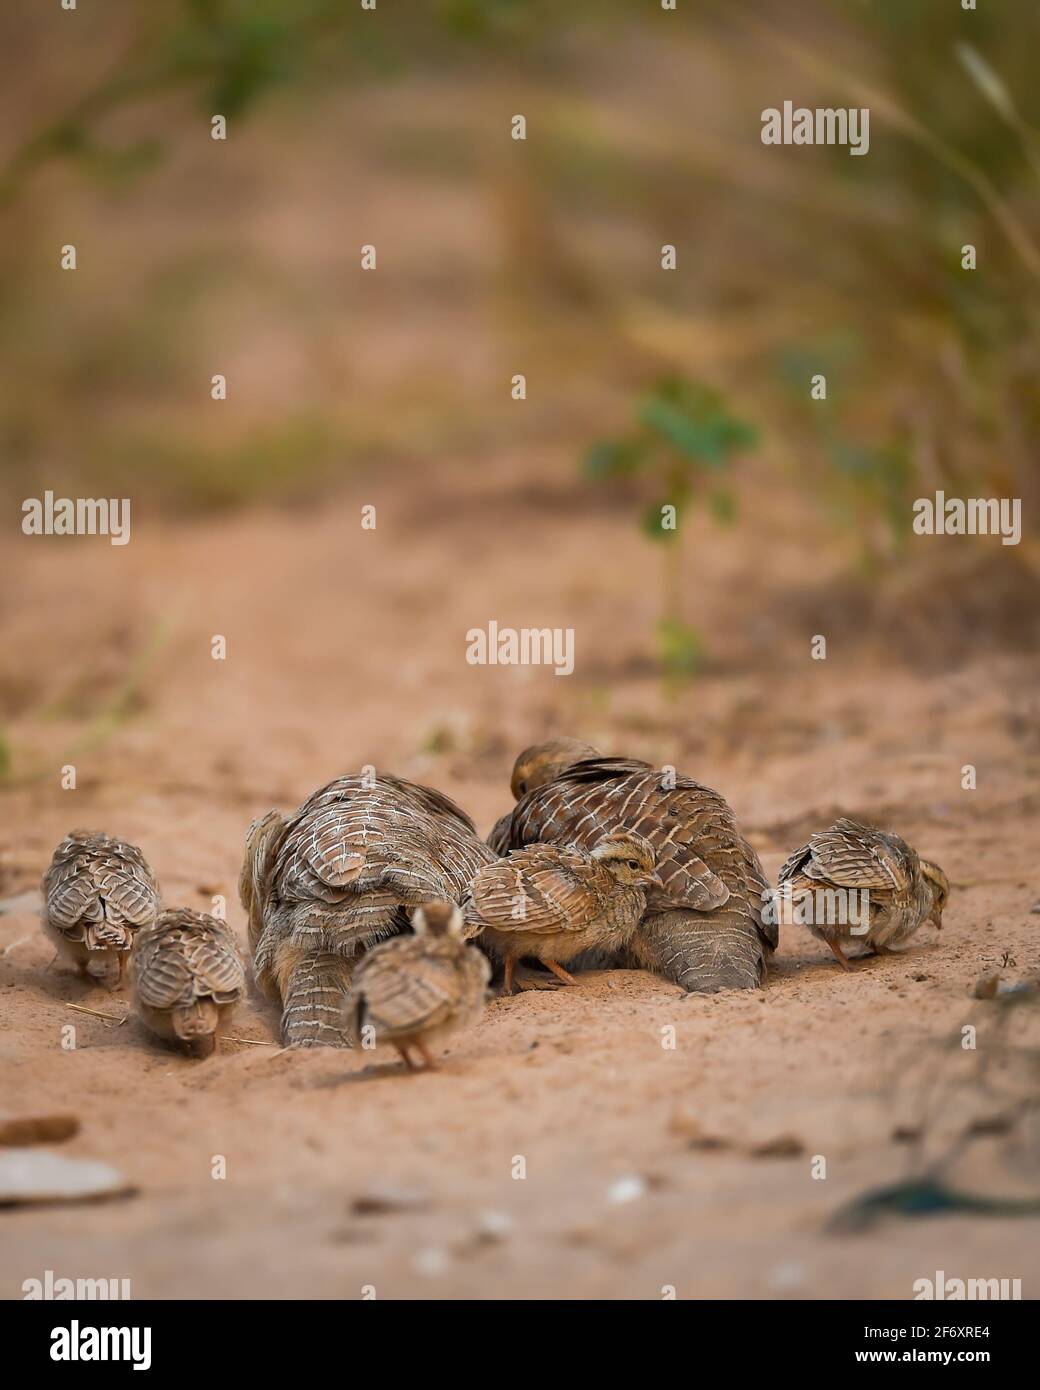 grey francolin or grey partridge or Francolinus pondicerianus family with chicks or babies walking together on a jungle track at Ranthambore india Stock Photo